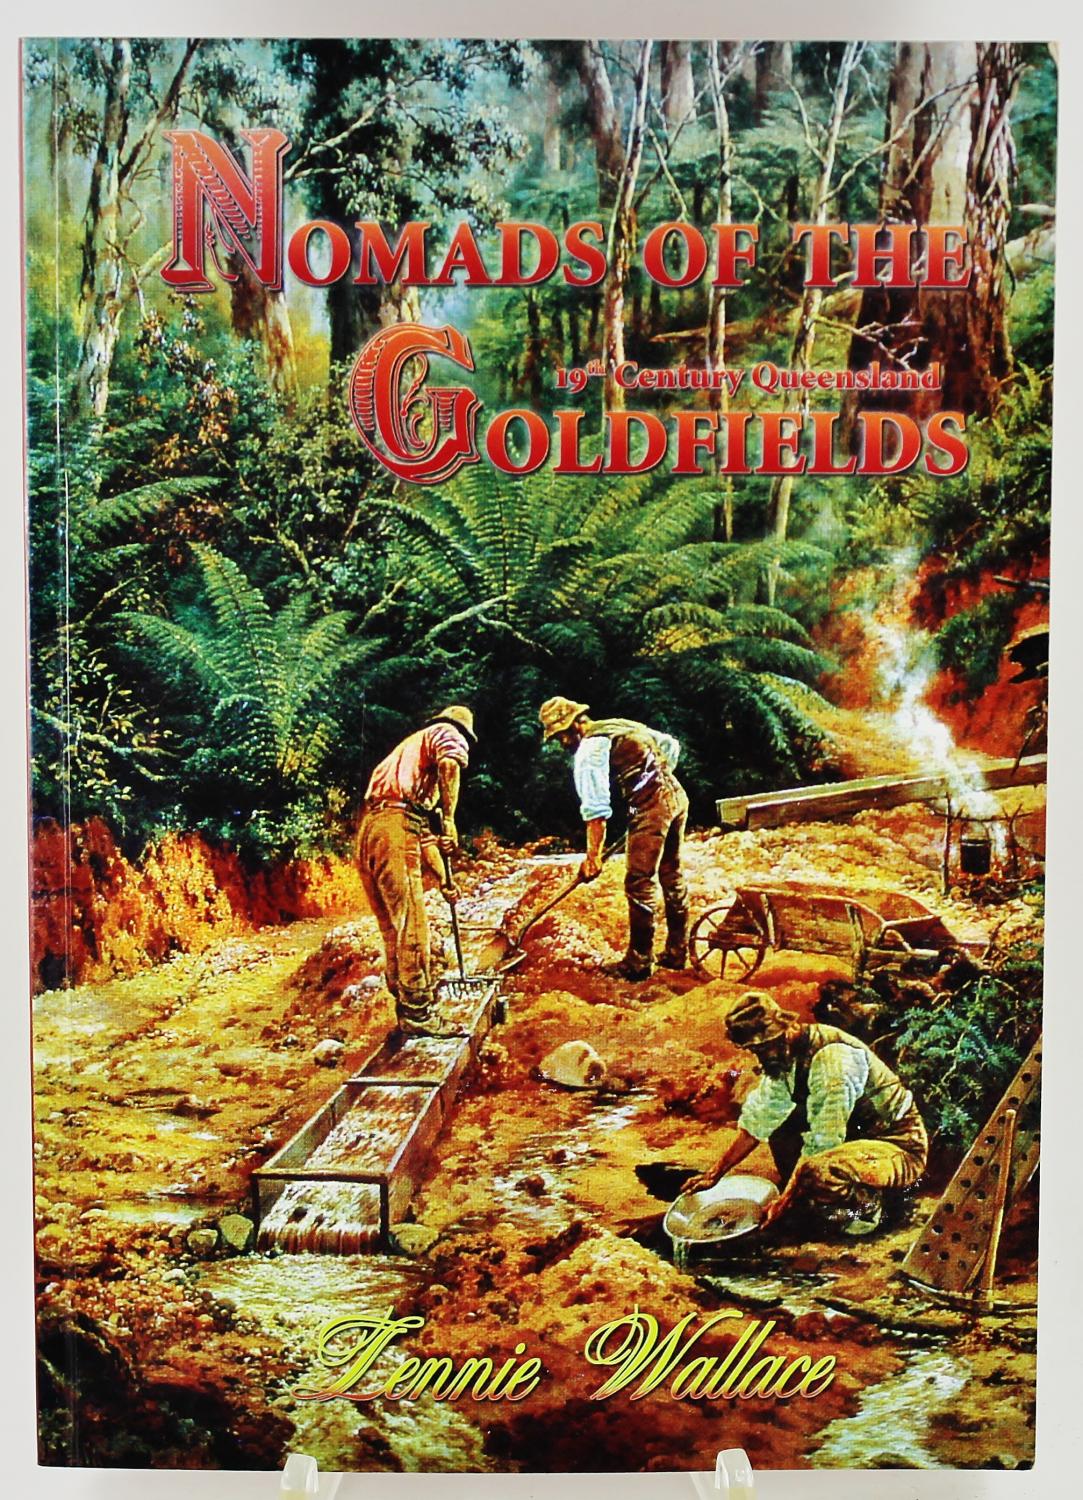 Nomads of the 19th Century Queensland Goldfields the goldfields of Gympie, the Palmer and the Hodgkinson including the Life Story of Dr. Jack Hamilton 1842-1916 Prospector, Pugilist, Physician, Politician - Wallace, Lennie